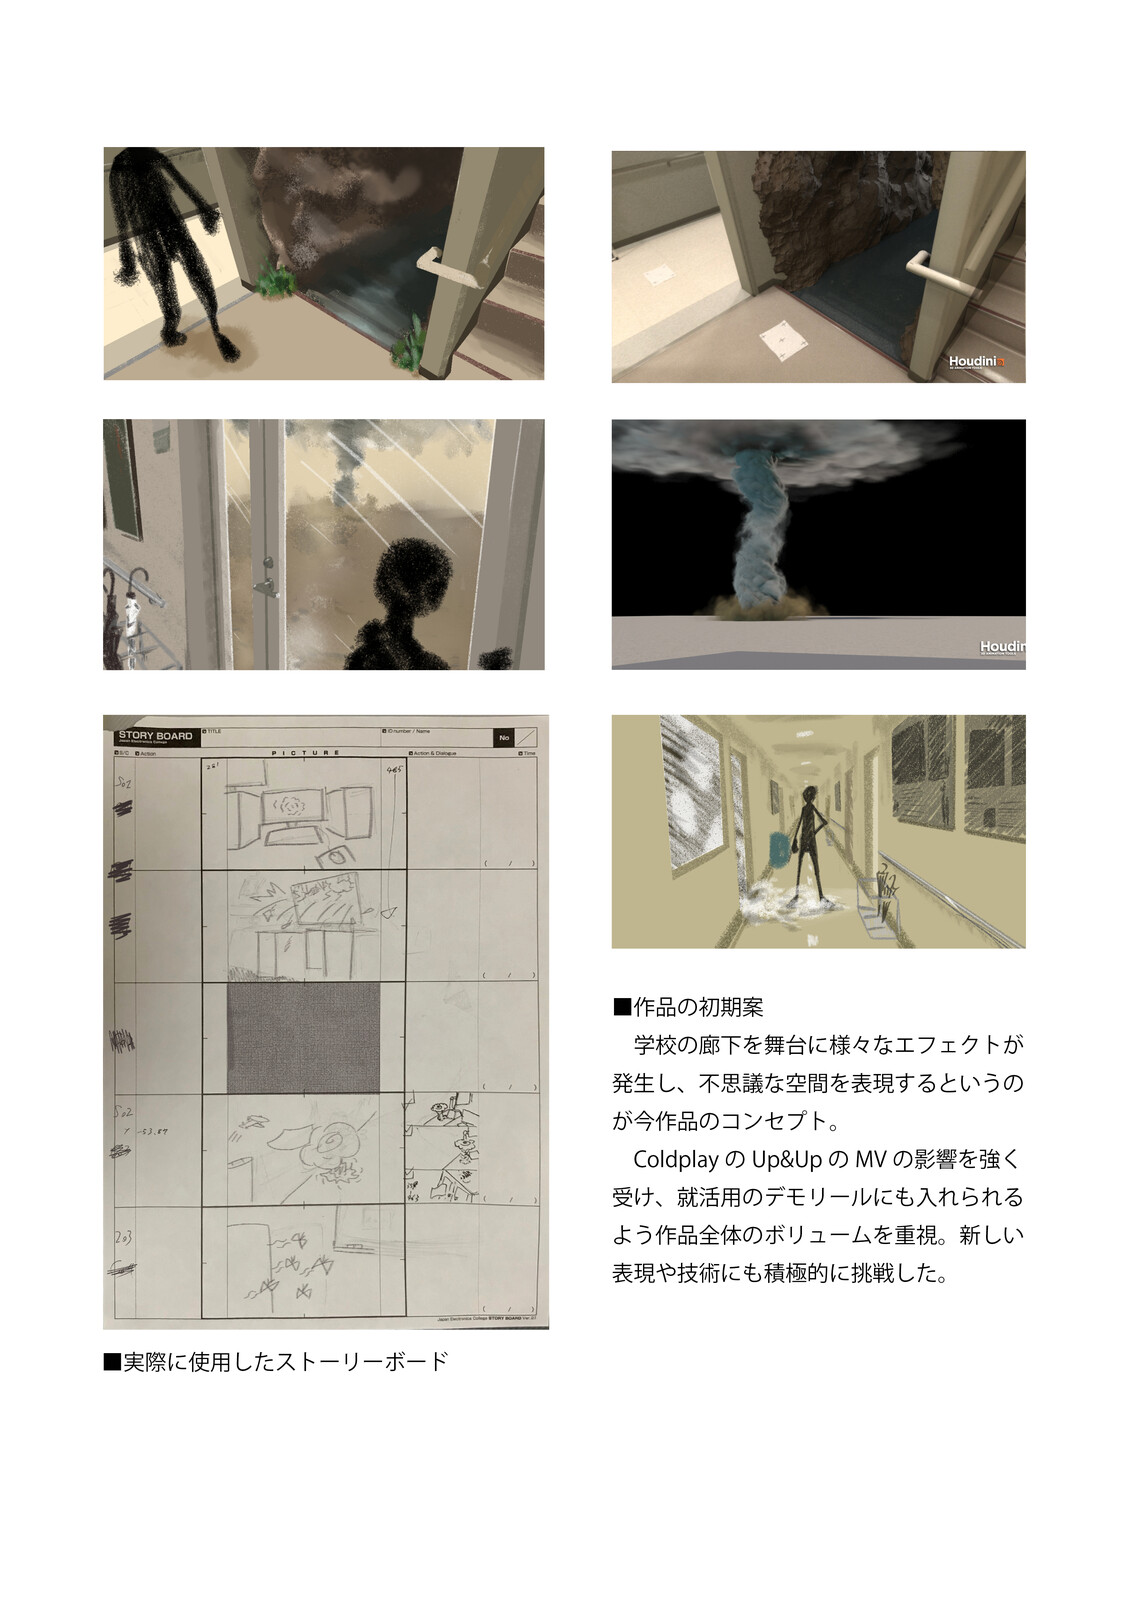 Concept and Storyboard
I was inspired by Coldplay Up&amp;Up MV.